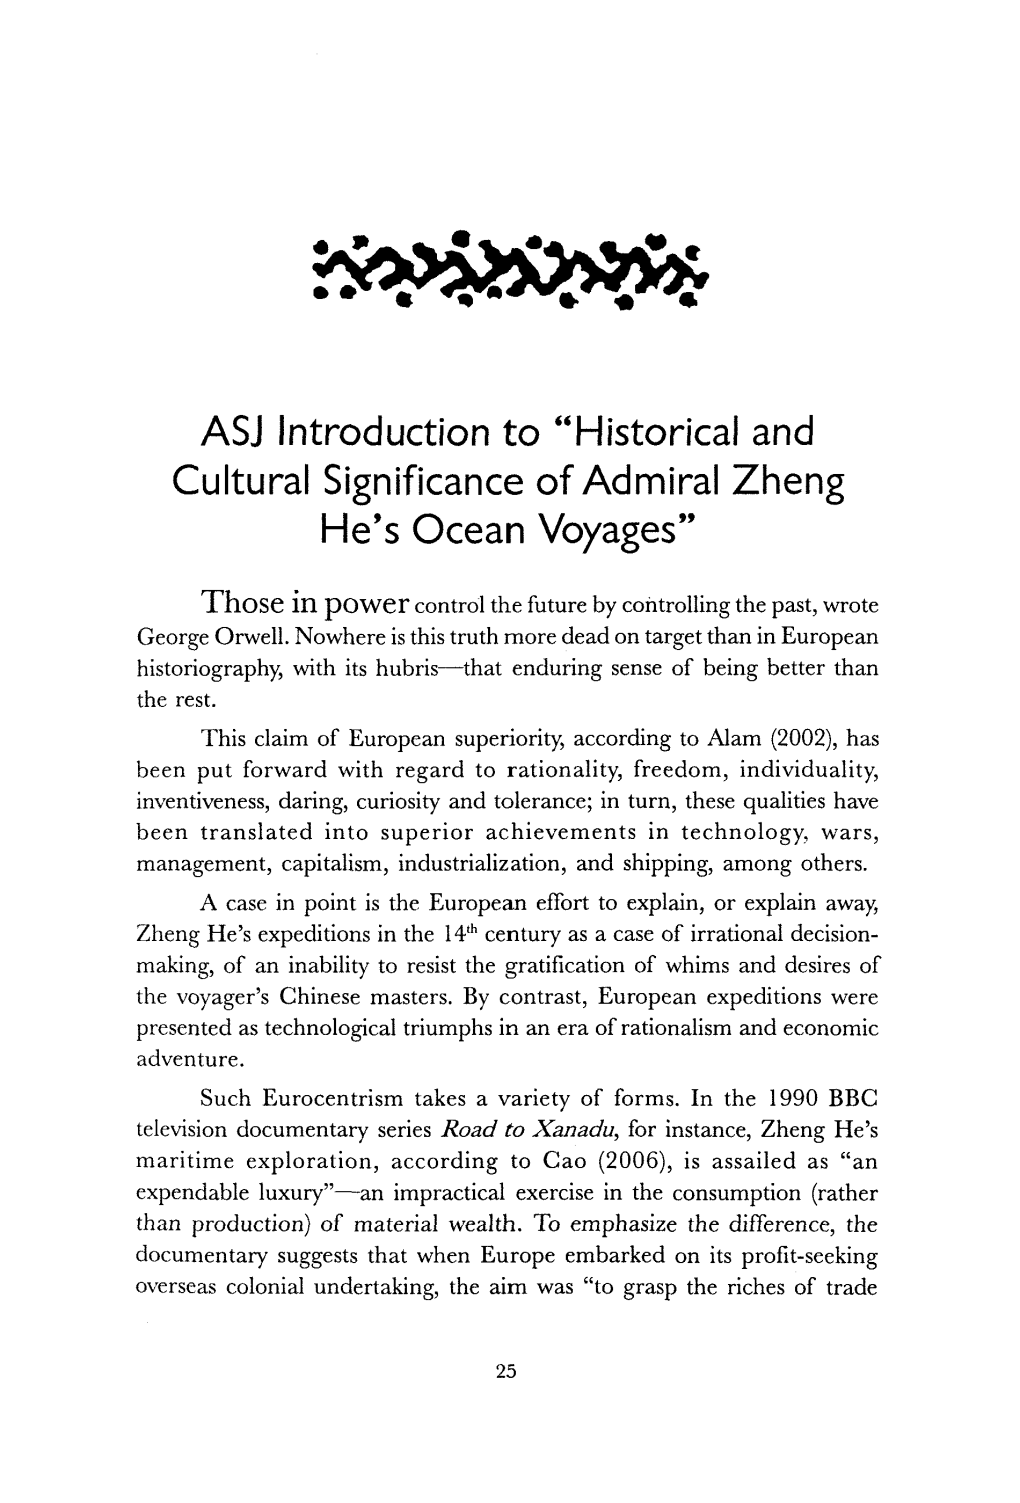 ASJ Introduction to "Historical and Cultural Significance of Admiral Zheng He's Ocean Voyages"